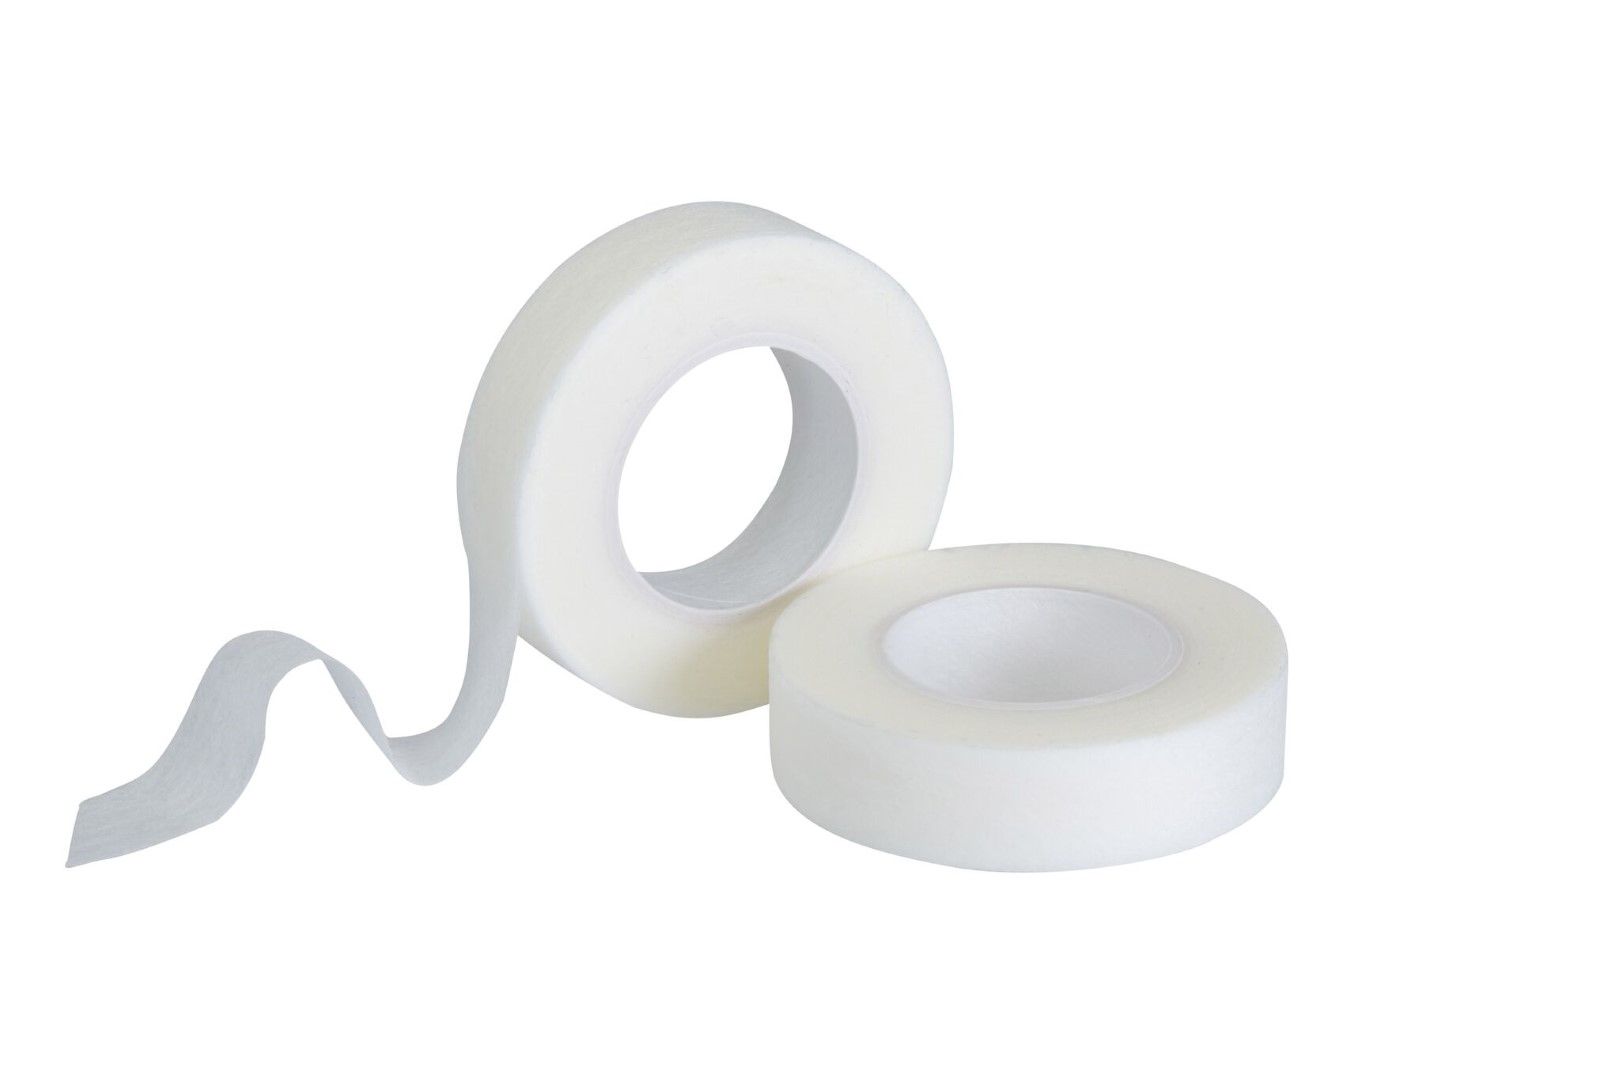 MEDSTOCK MICROPOROUS SURGICAL TAPE photo